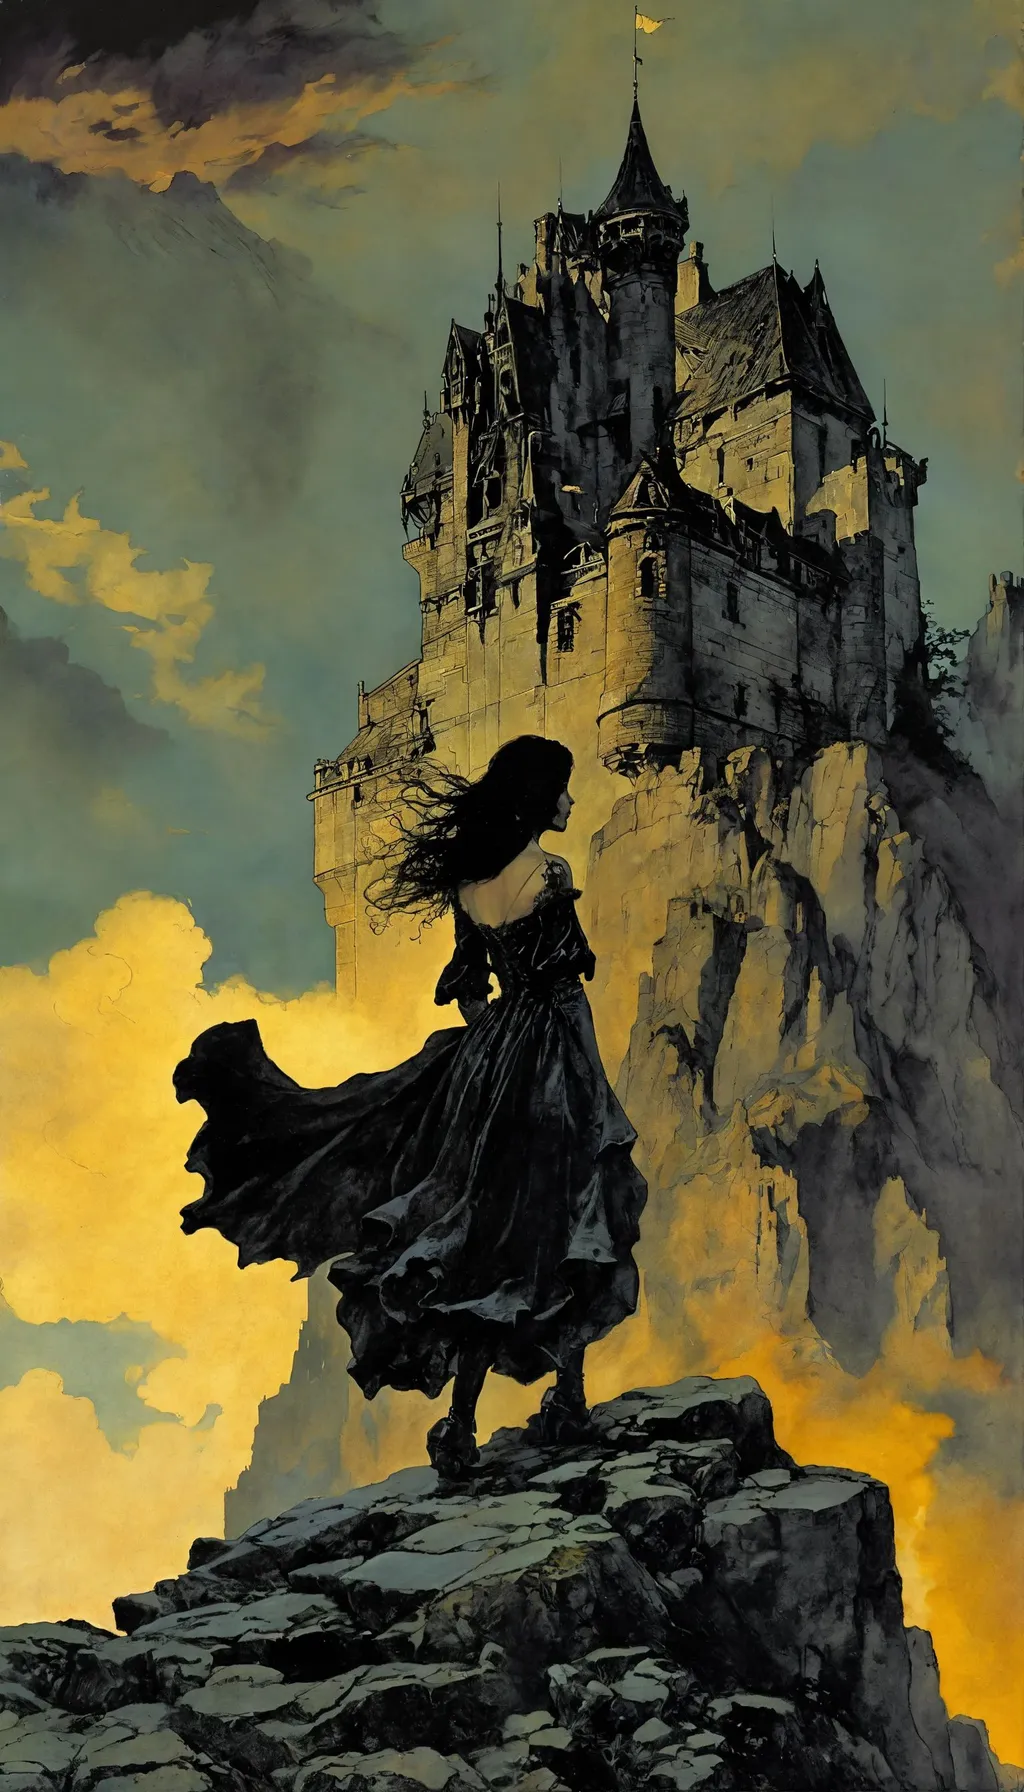 Prompt: style of john blanche, tumblr, rob rey, four stories high, by Earl Norem, chris van allsburg, a drawing of a castle on top of a hill, cover of magazine, shutterstock, art nouveau wallpaper, dark and stormy atmosphere, gothic woman posing